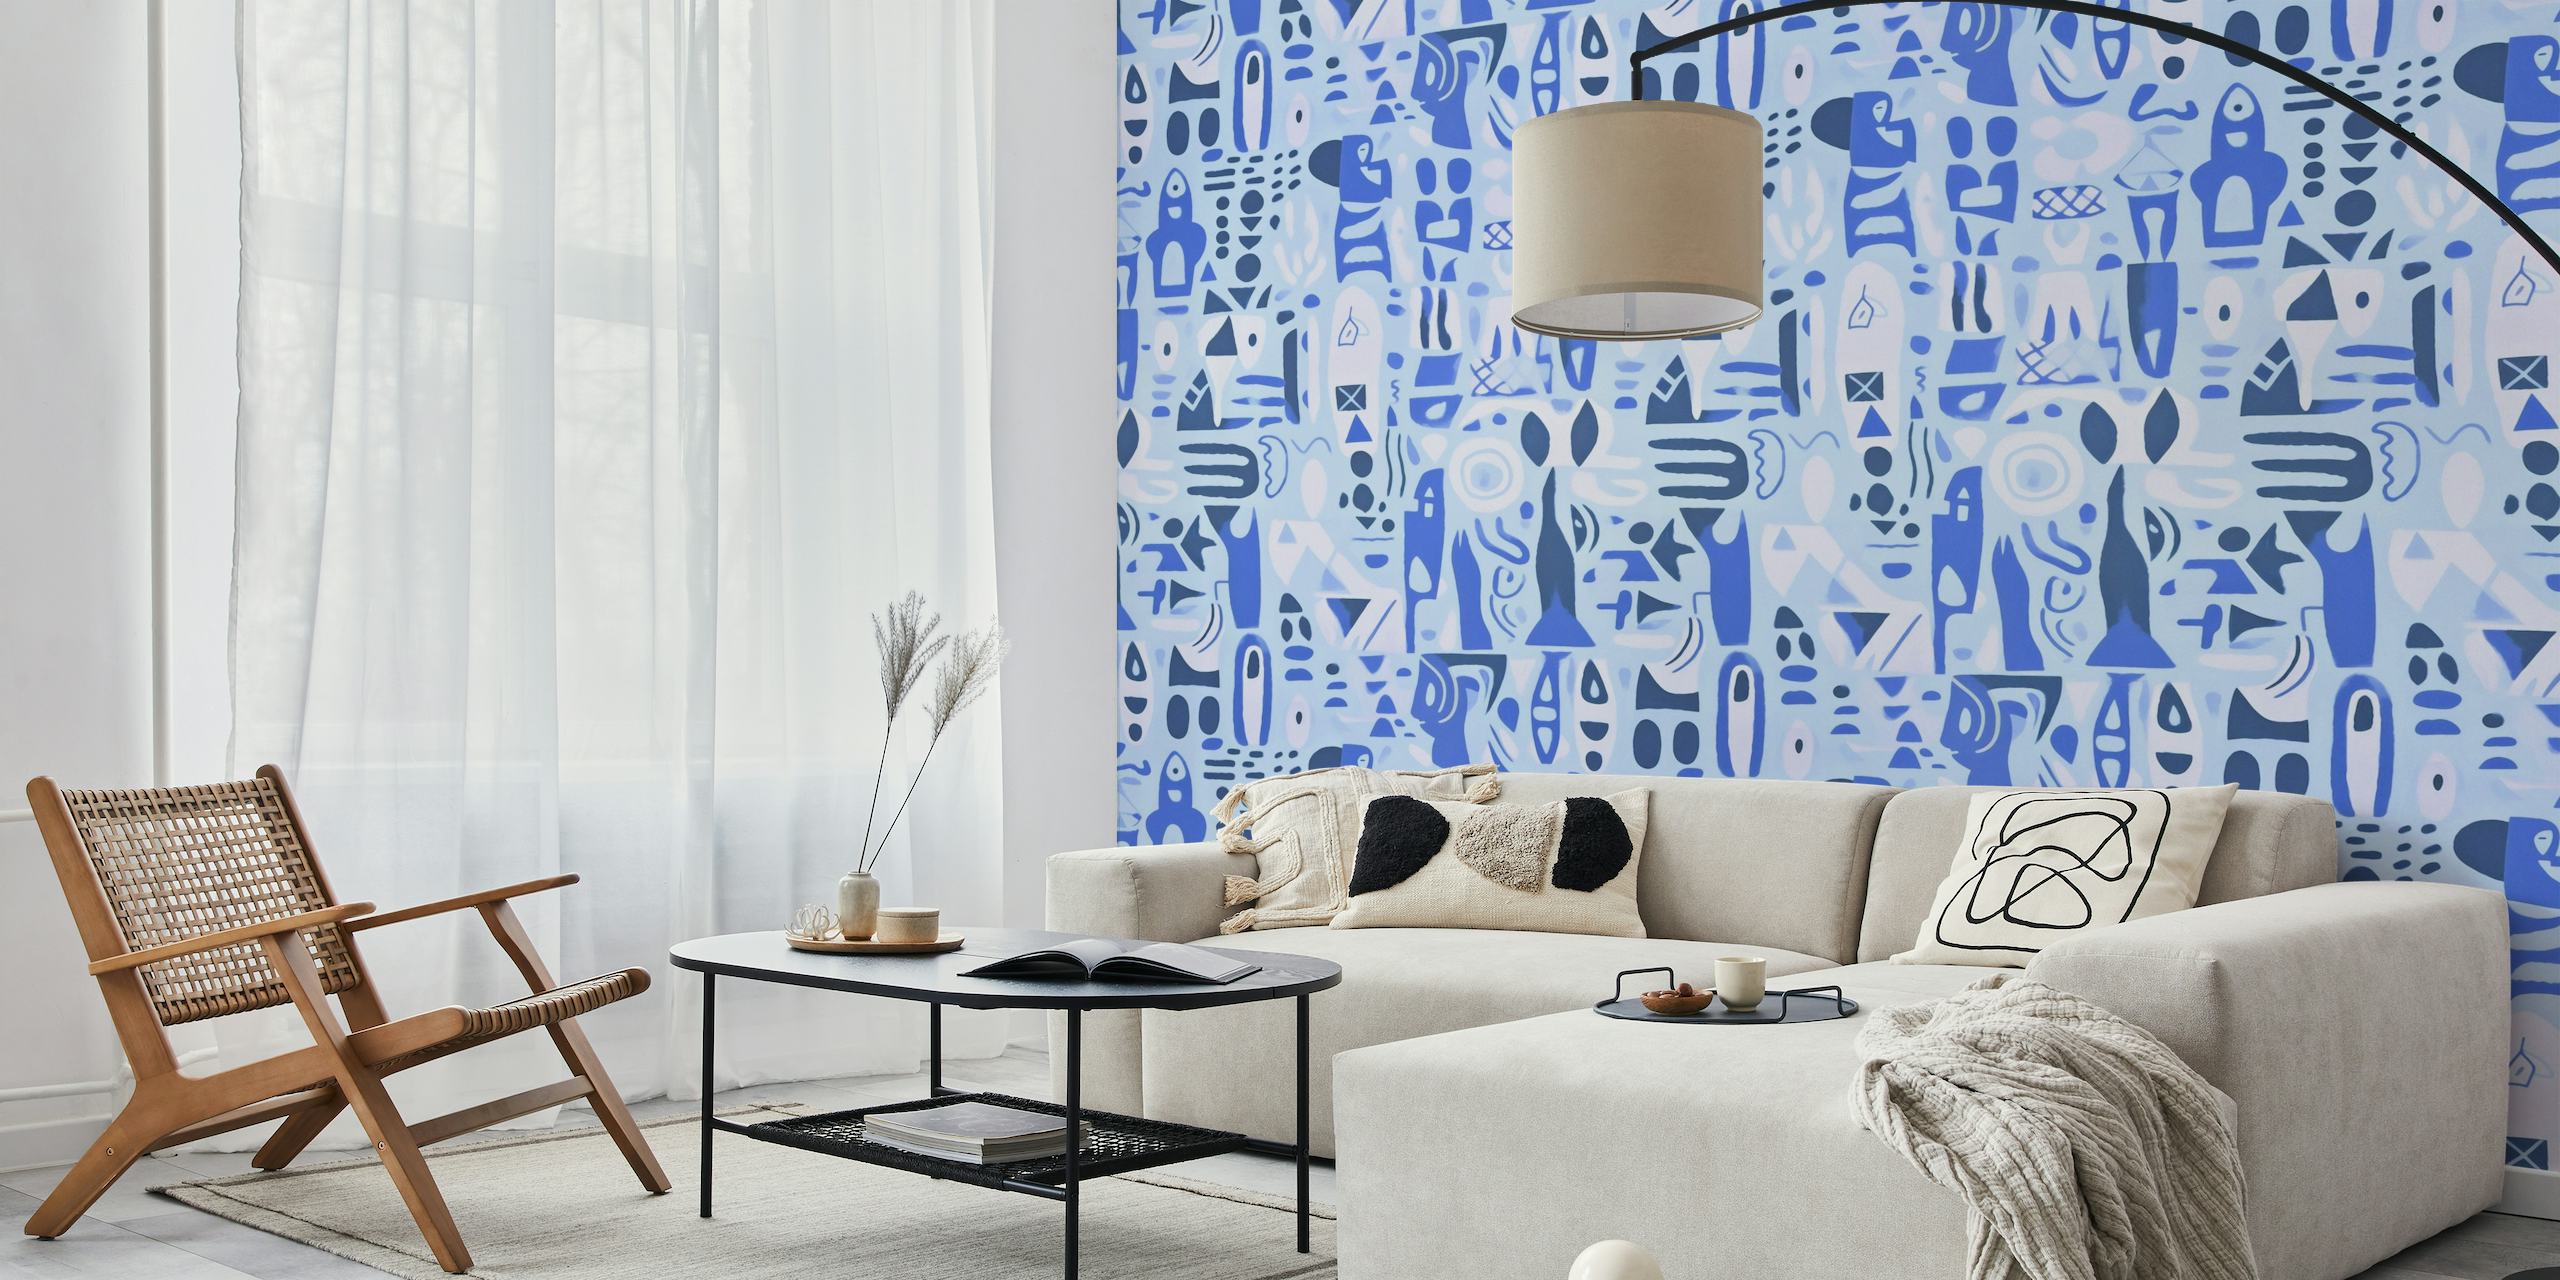 Abstract blue shapes and symbols wall mural from happywall.com